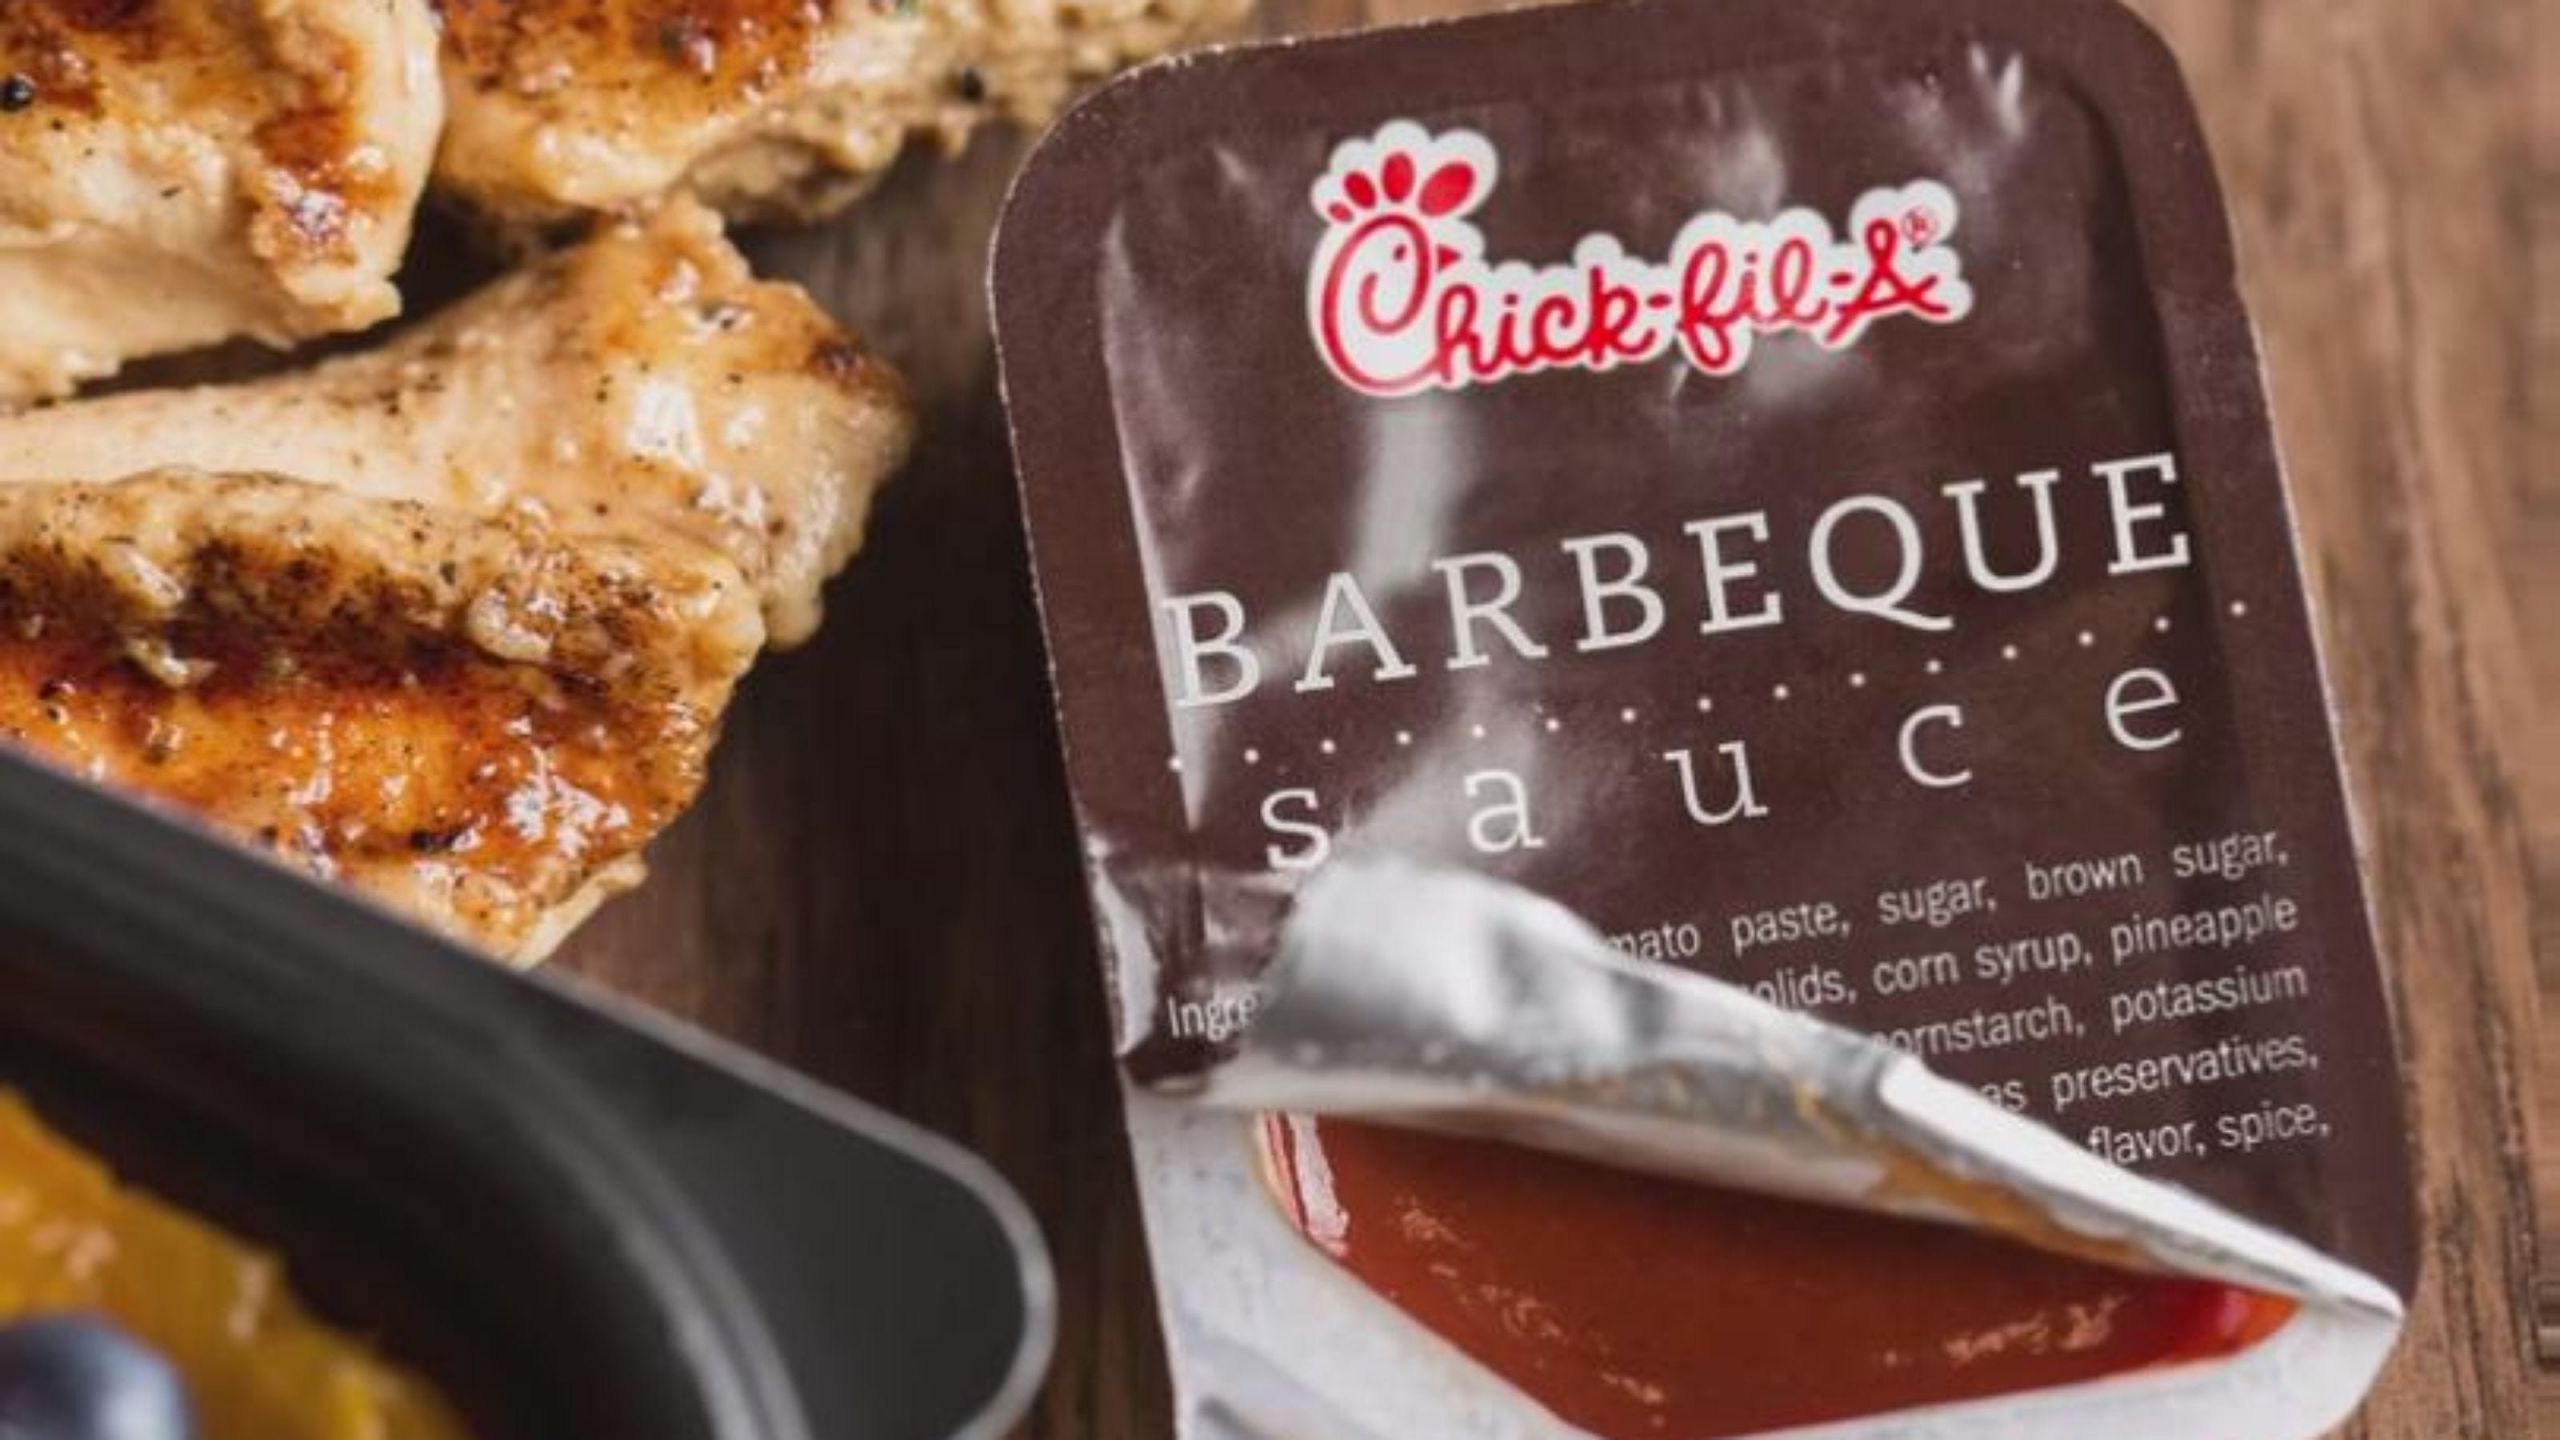 Chick Fil A Bbq Sauce
 Dipping Sauces and Salad Dressings